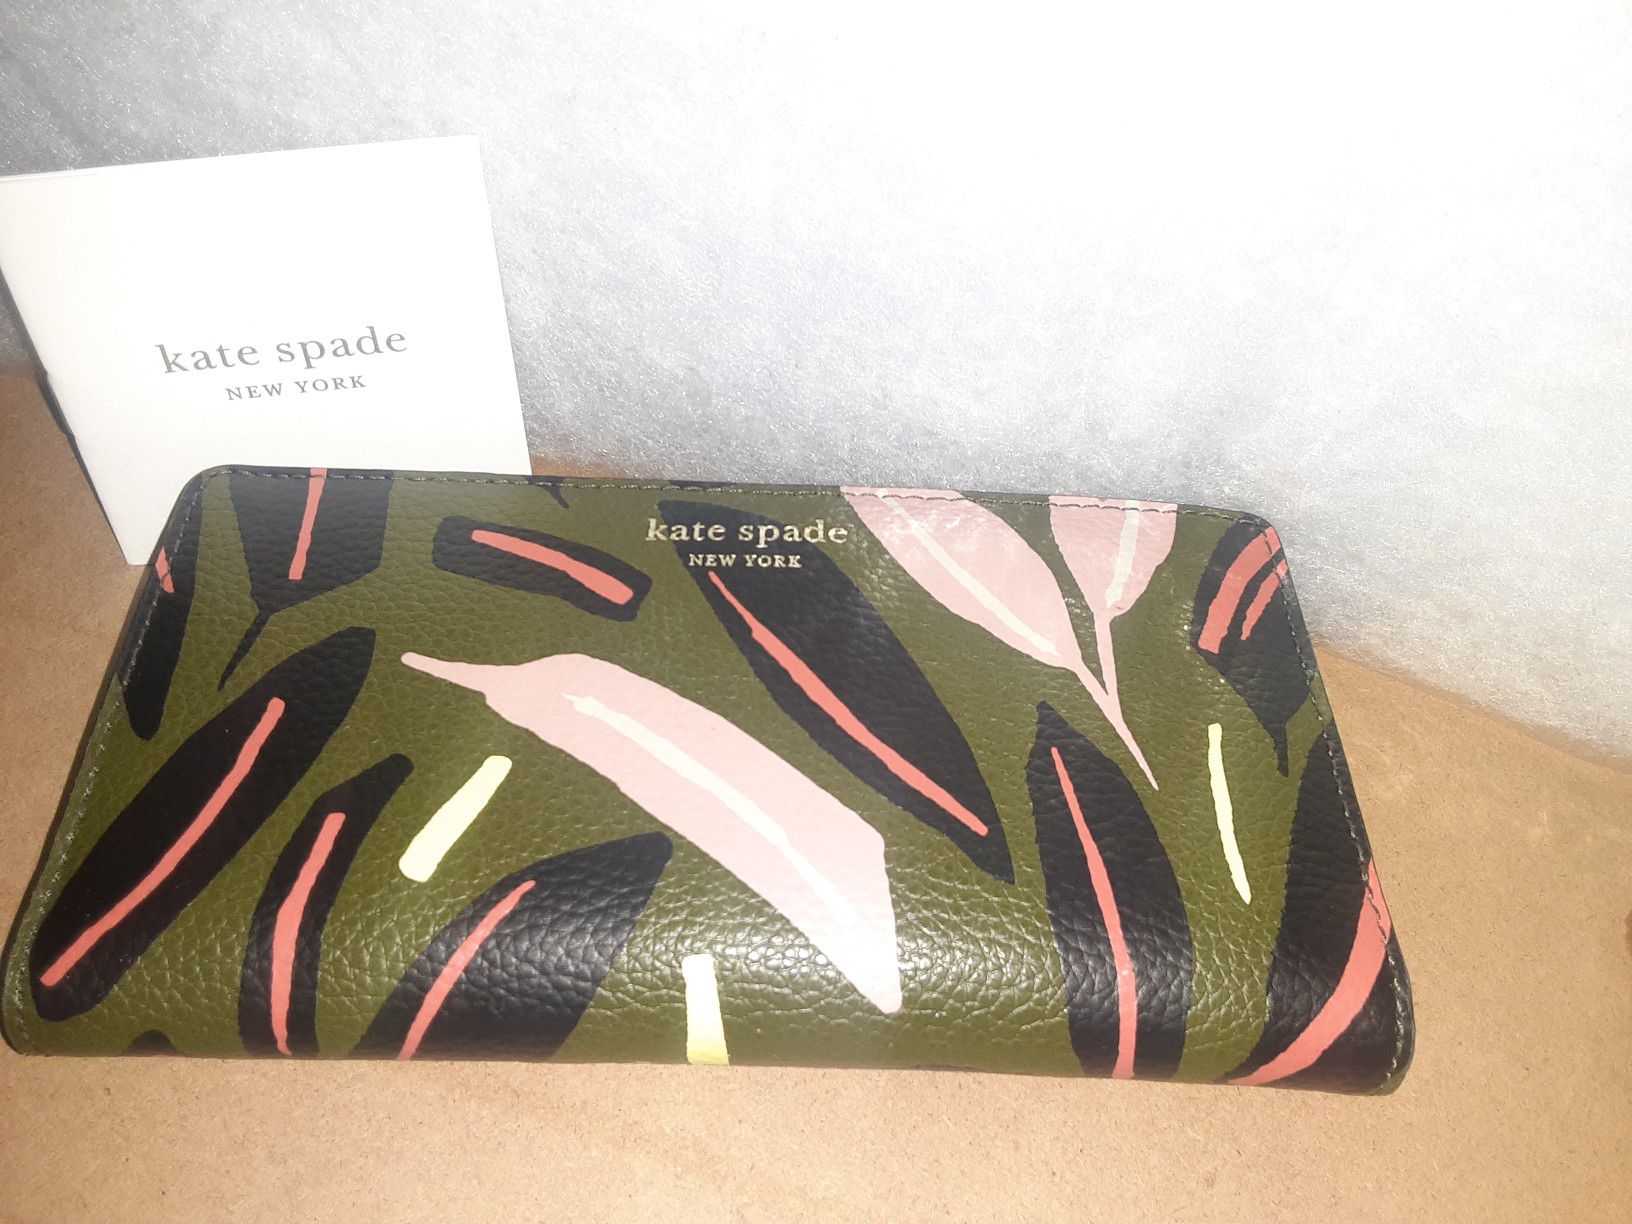 Kate Spade New York women's wallet. Brand new. Perfect condition